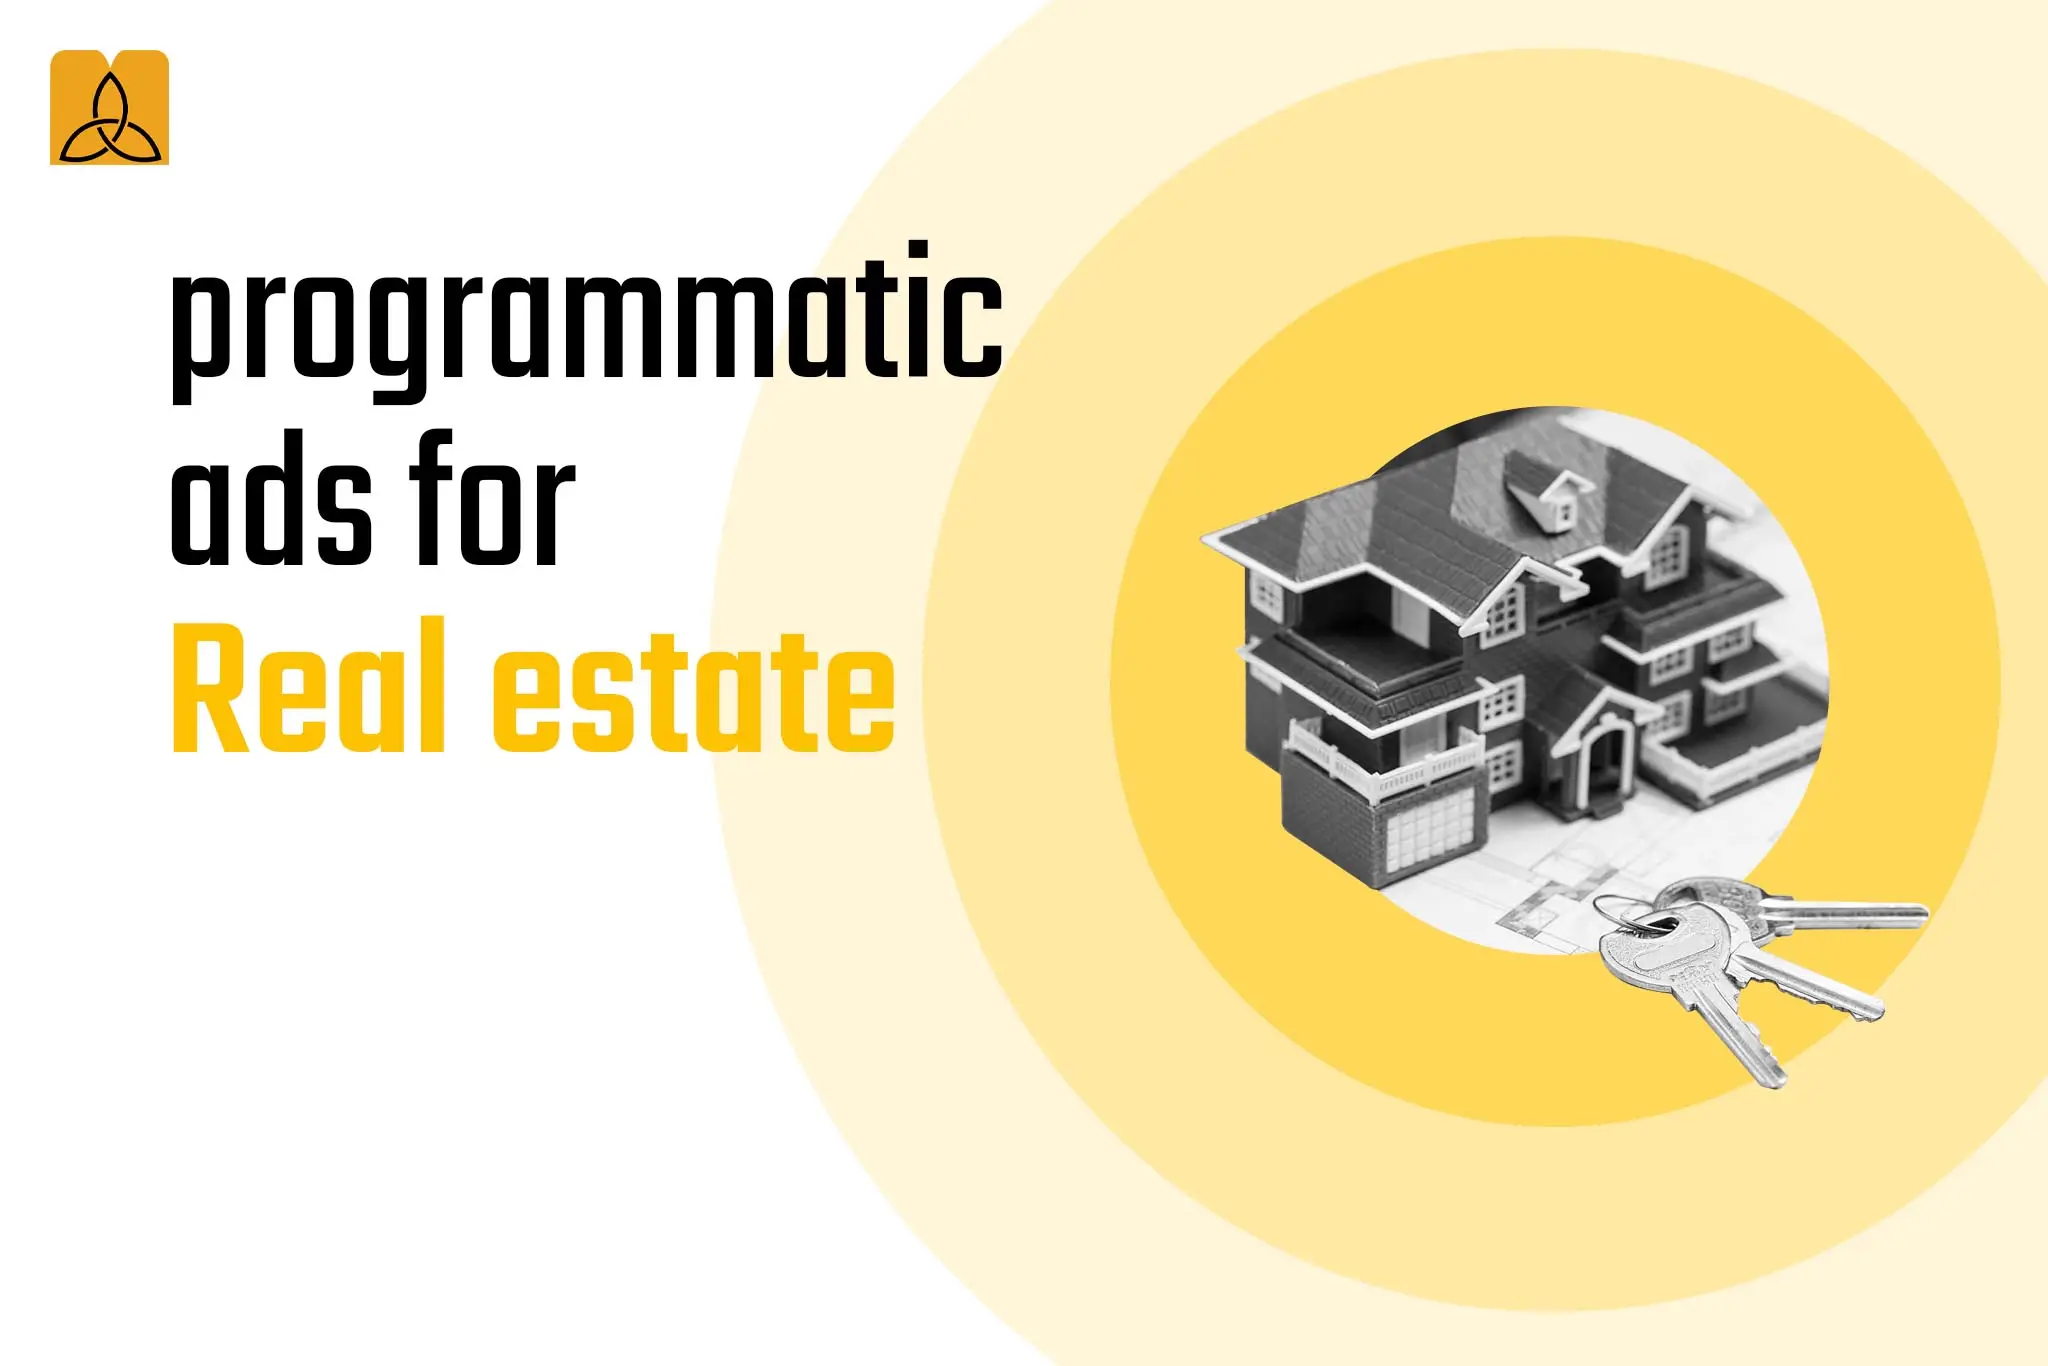 Programmatic ads for Real estate